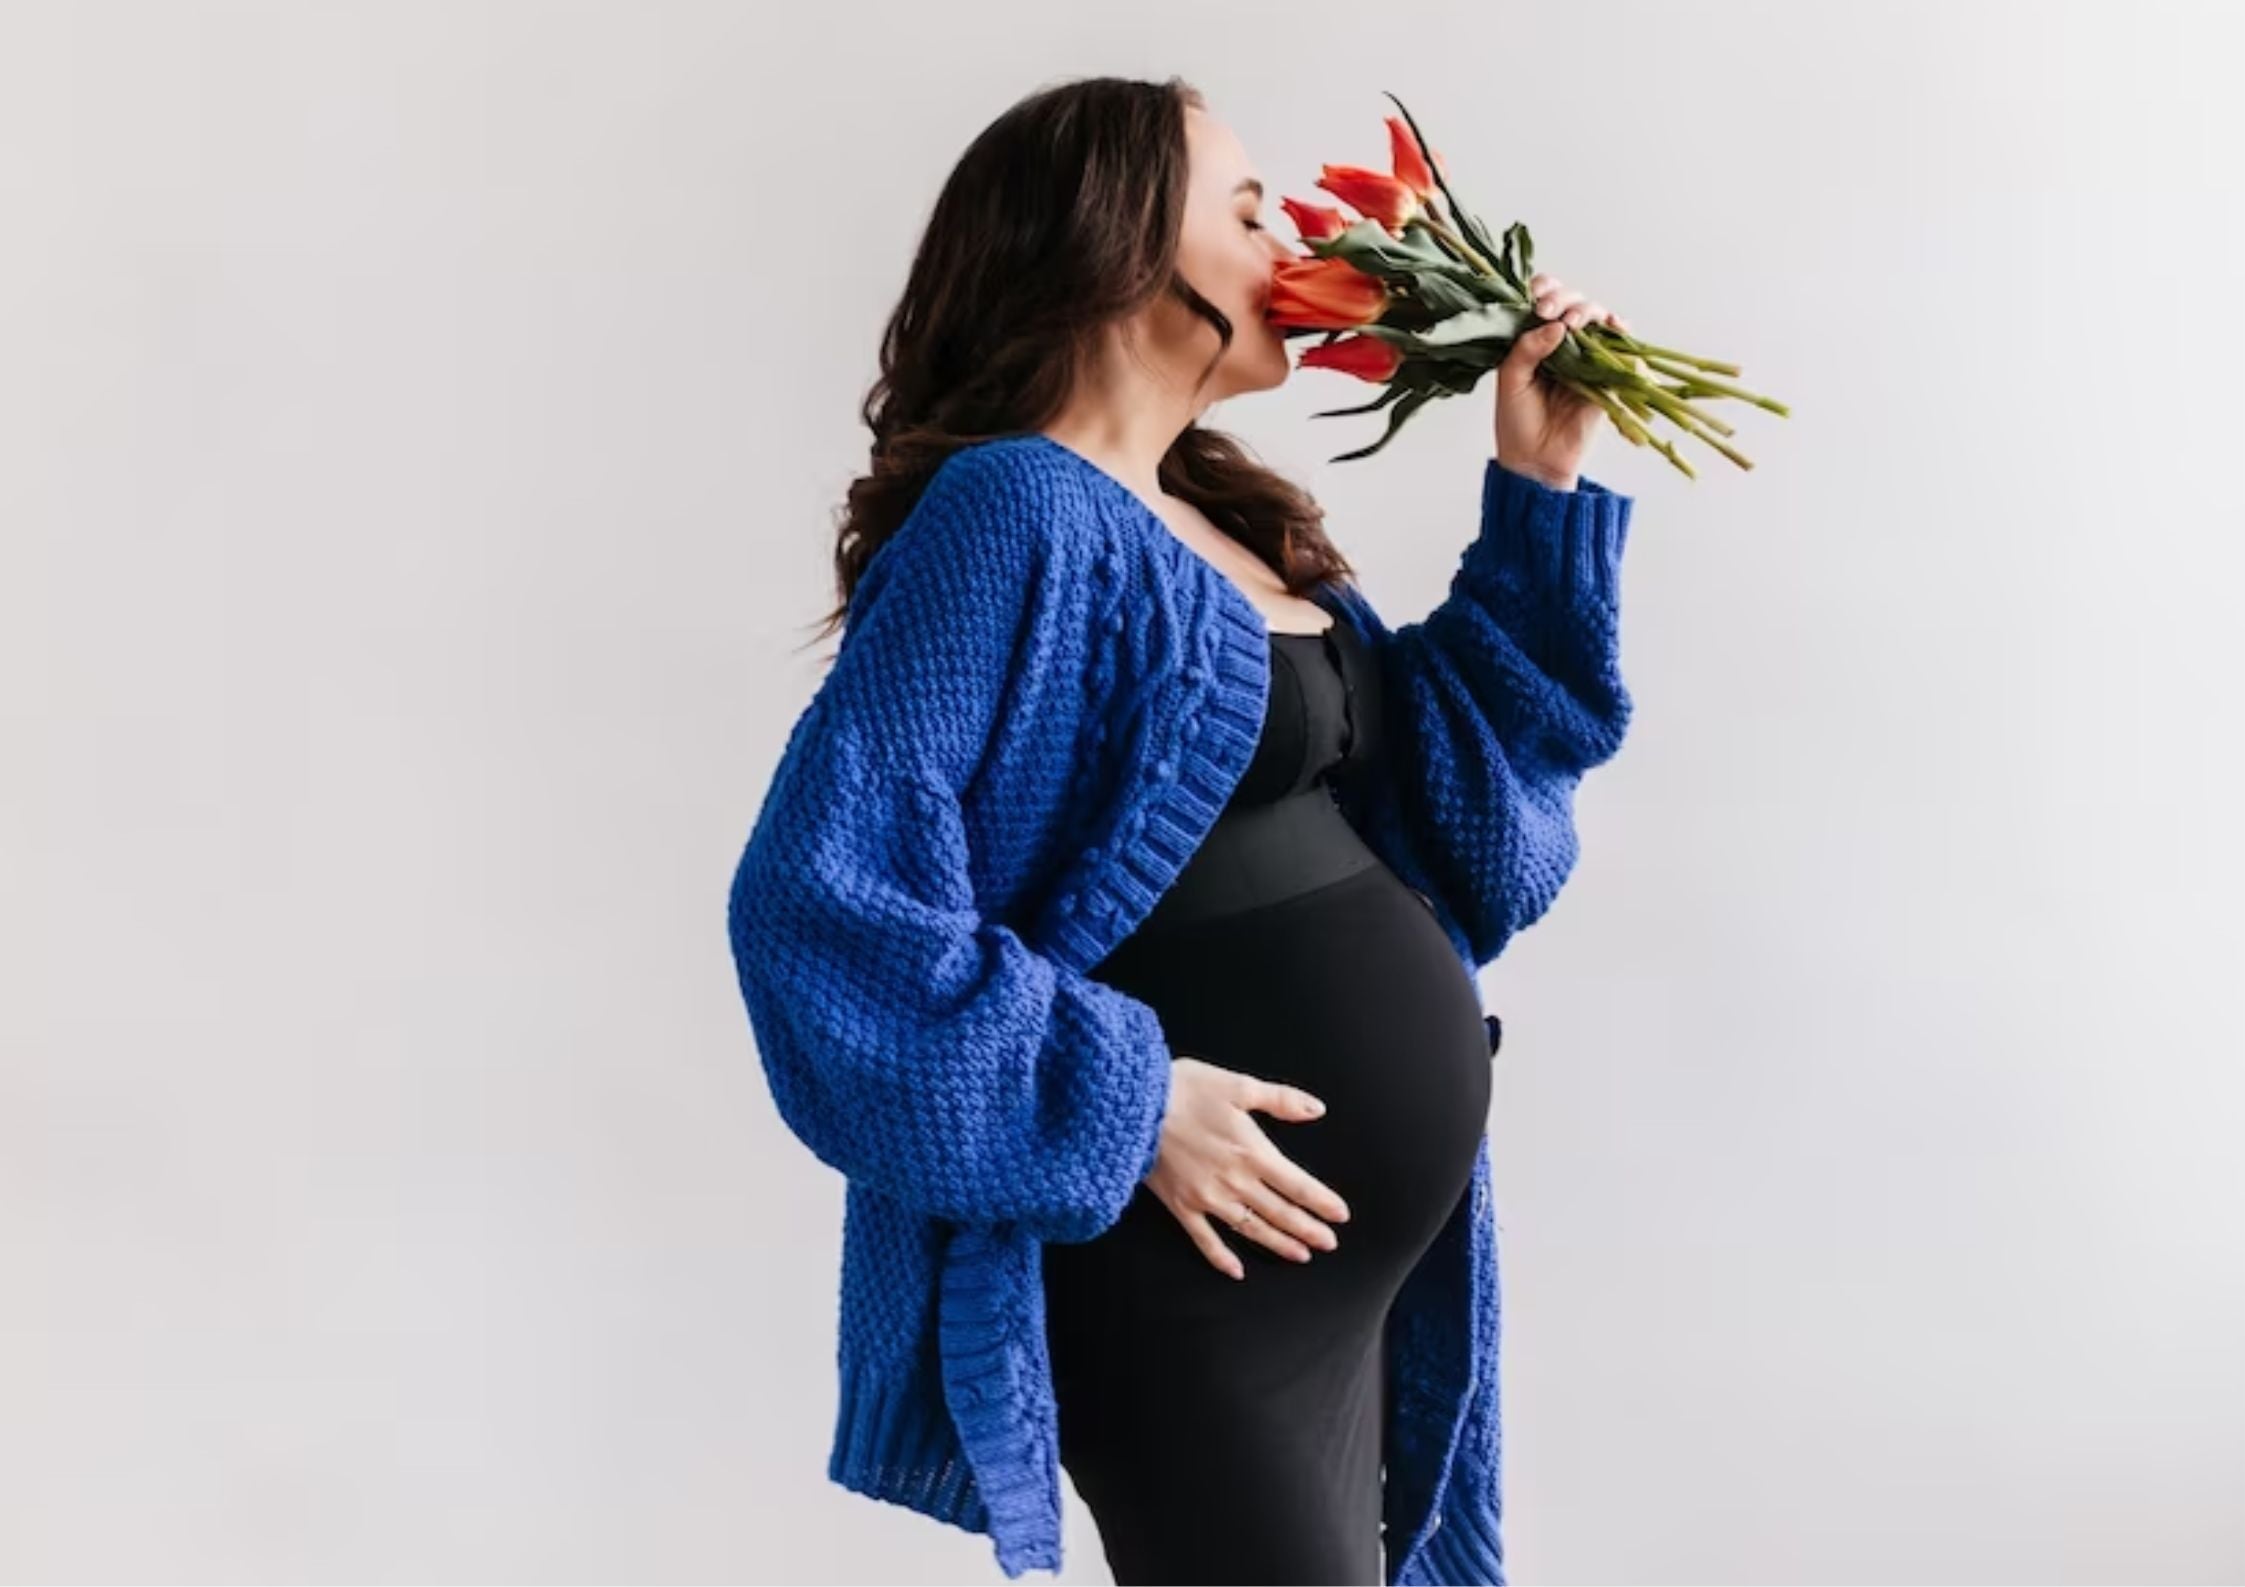 How To Style Your Old Clothes During Pregnancy?